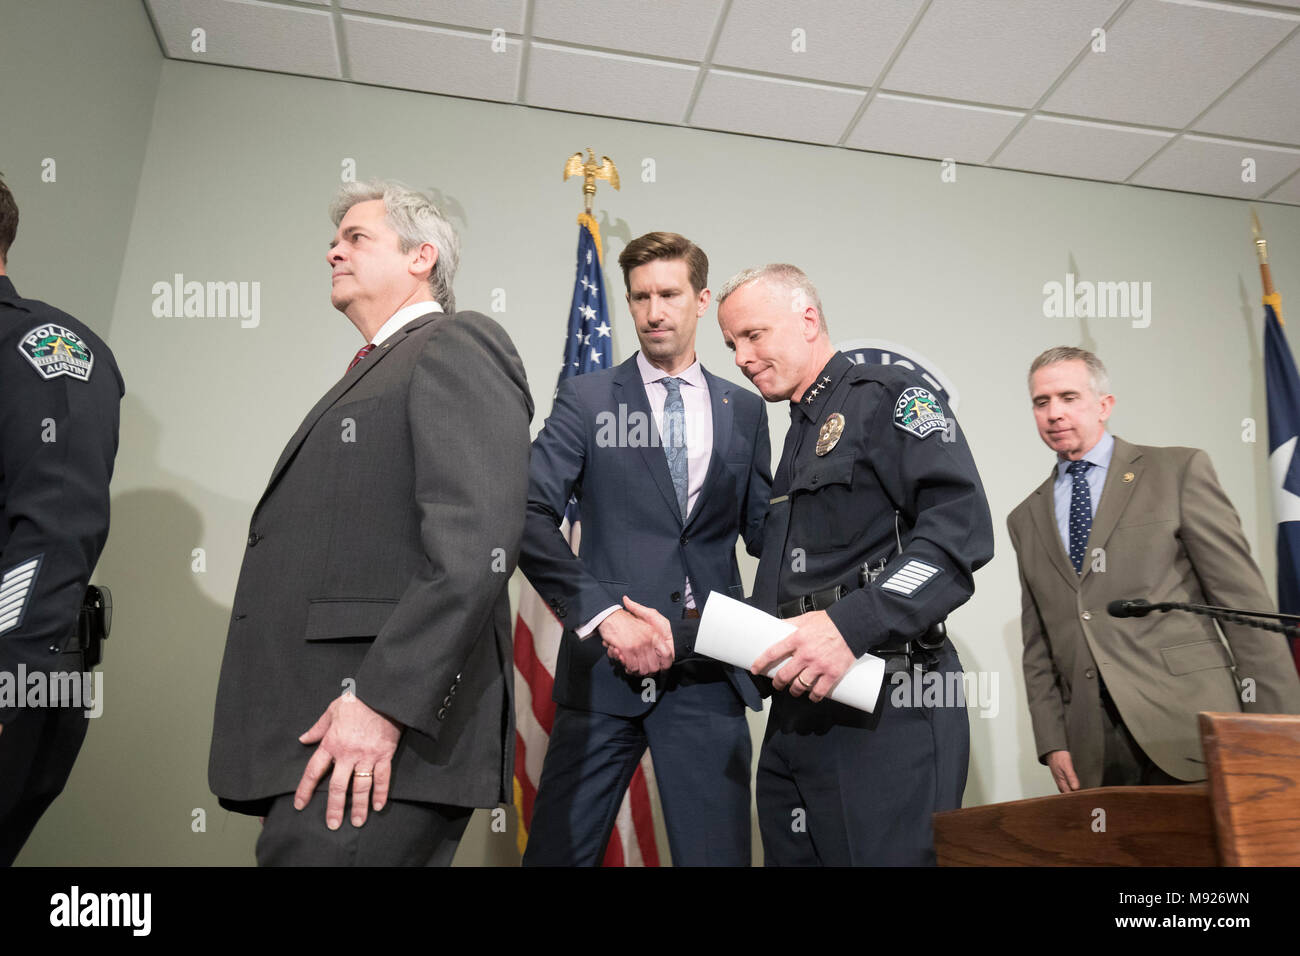 Austin interim Police Chief Brian Manley walks to a congratulatory press conference with other law enforcement officials who assisted in finding alleged Austin serial bomber, Mark A. Conditt. Conditt killed himself as police closed in on him on March 21. Stock Photo